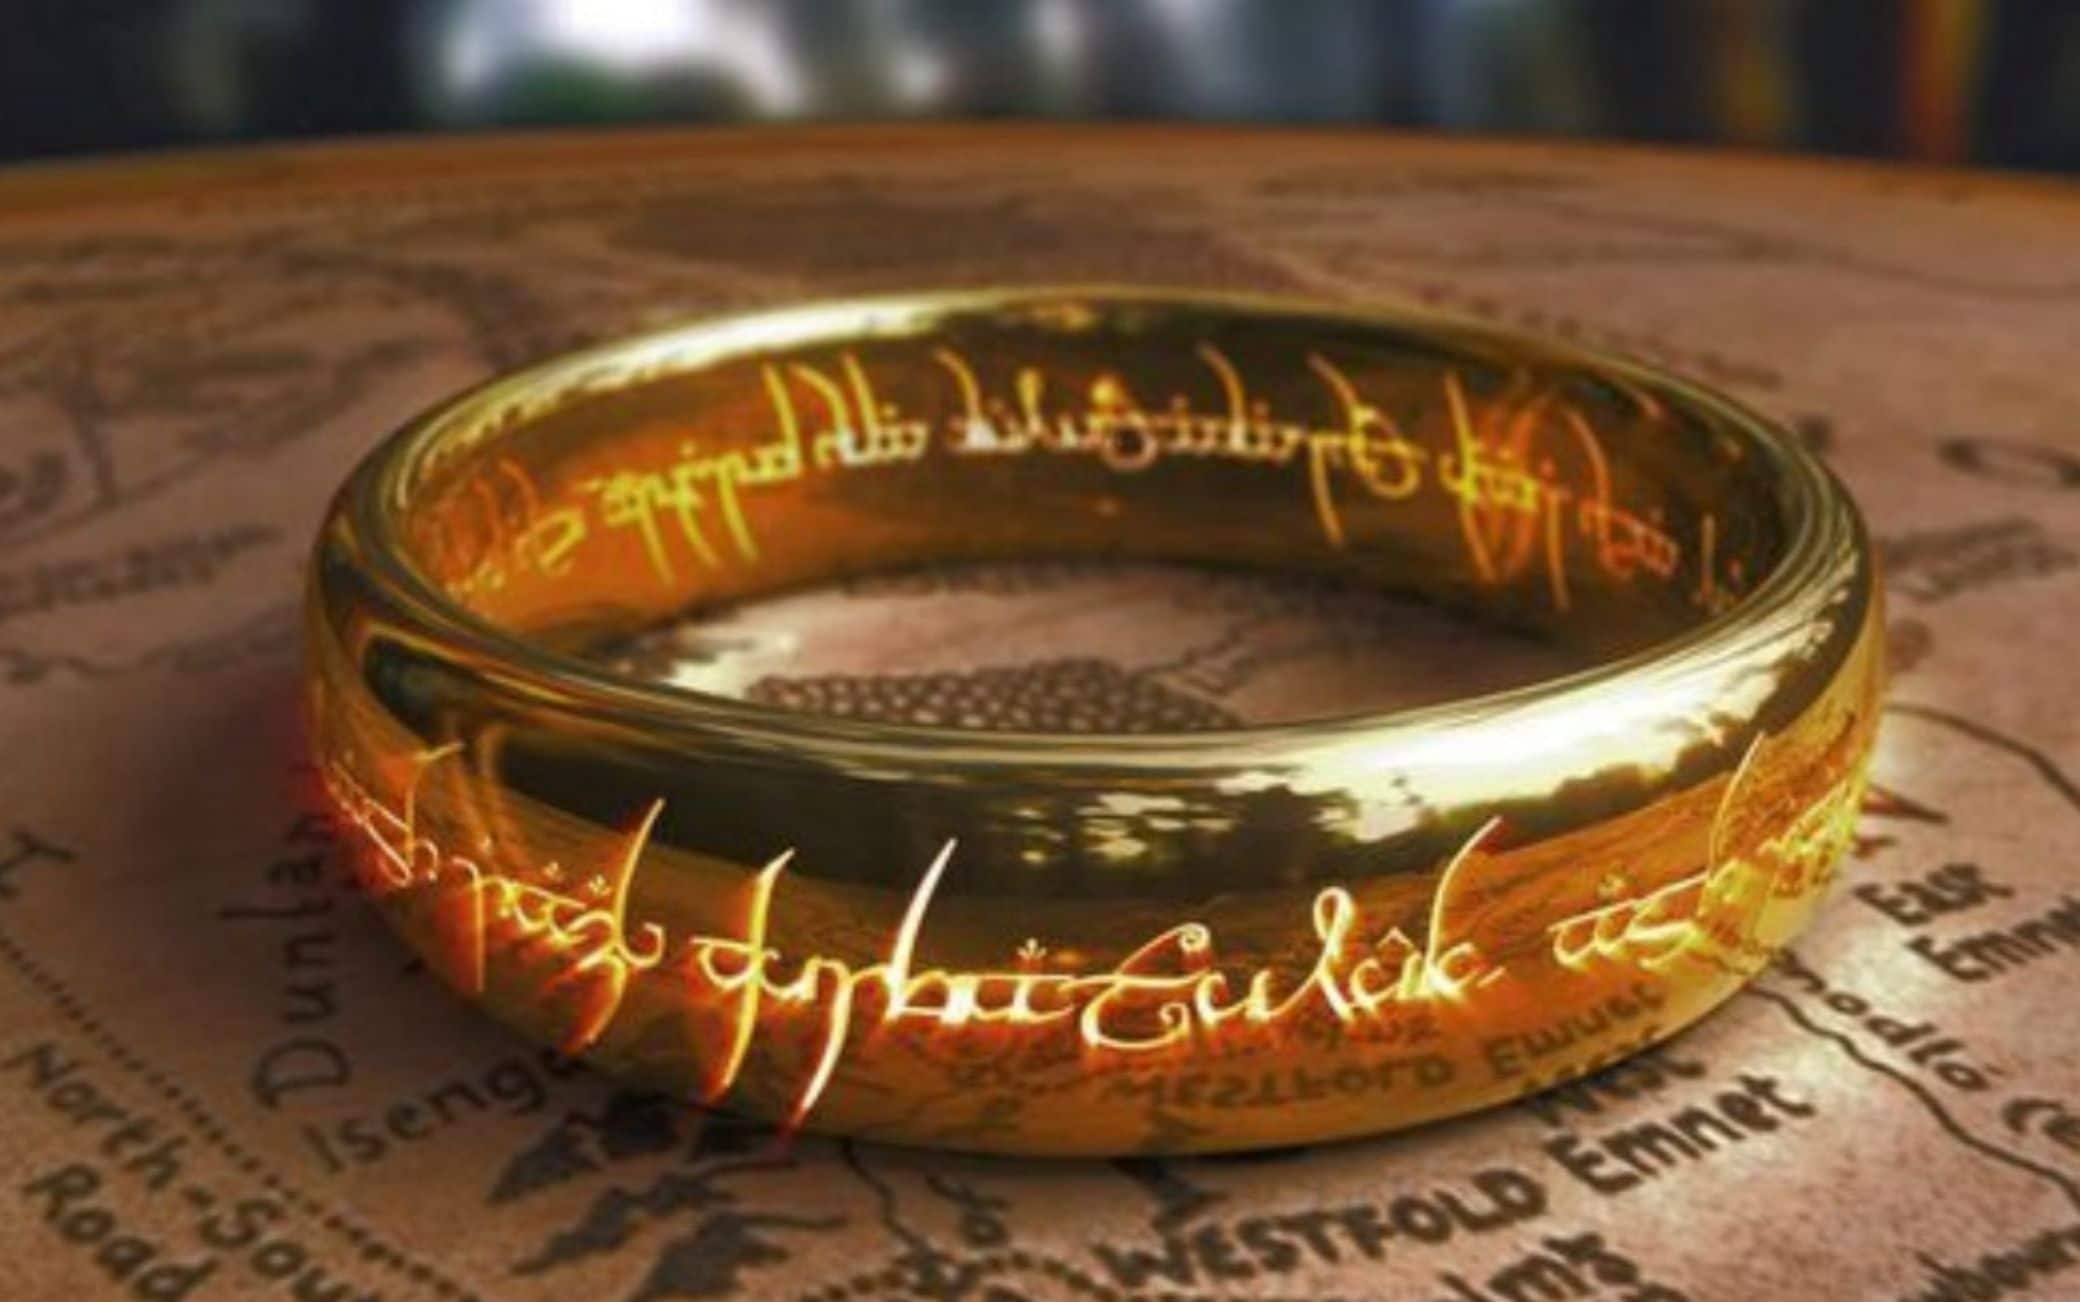 The Lord of the Rings: The Rings of Power, the release date of the teaser trailer